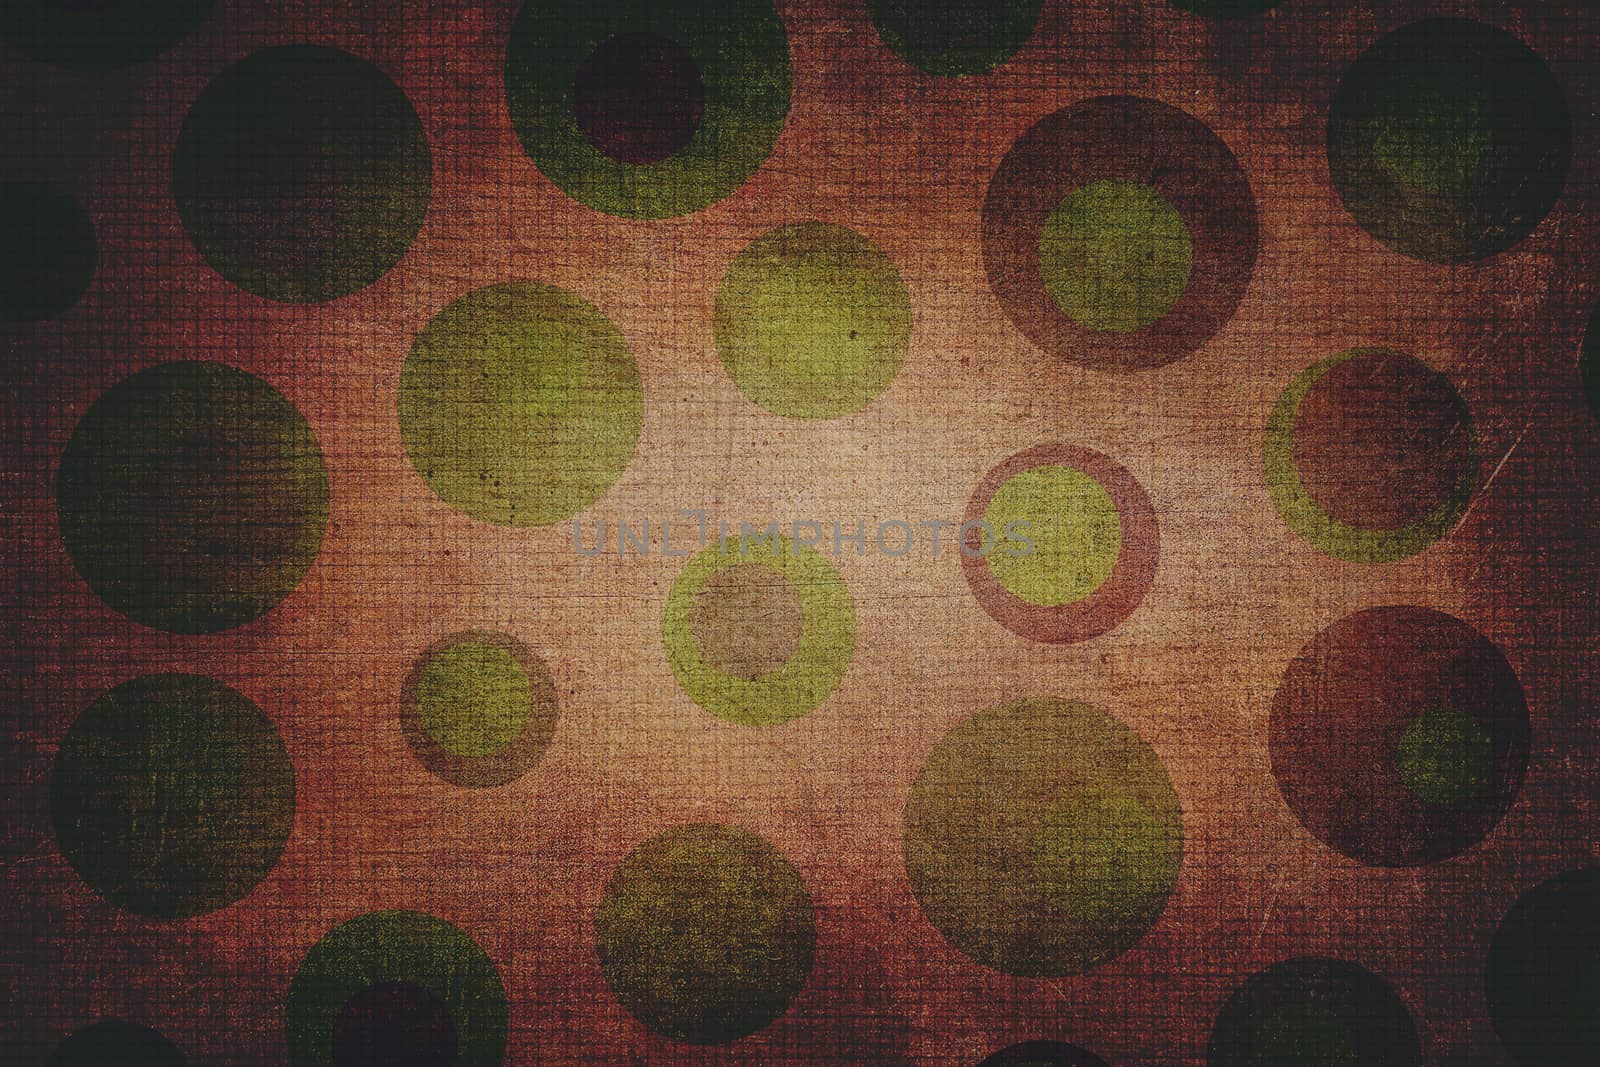 Dark texture background made of  green and brown dots, or circles, with squares